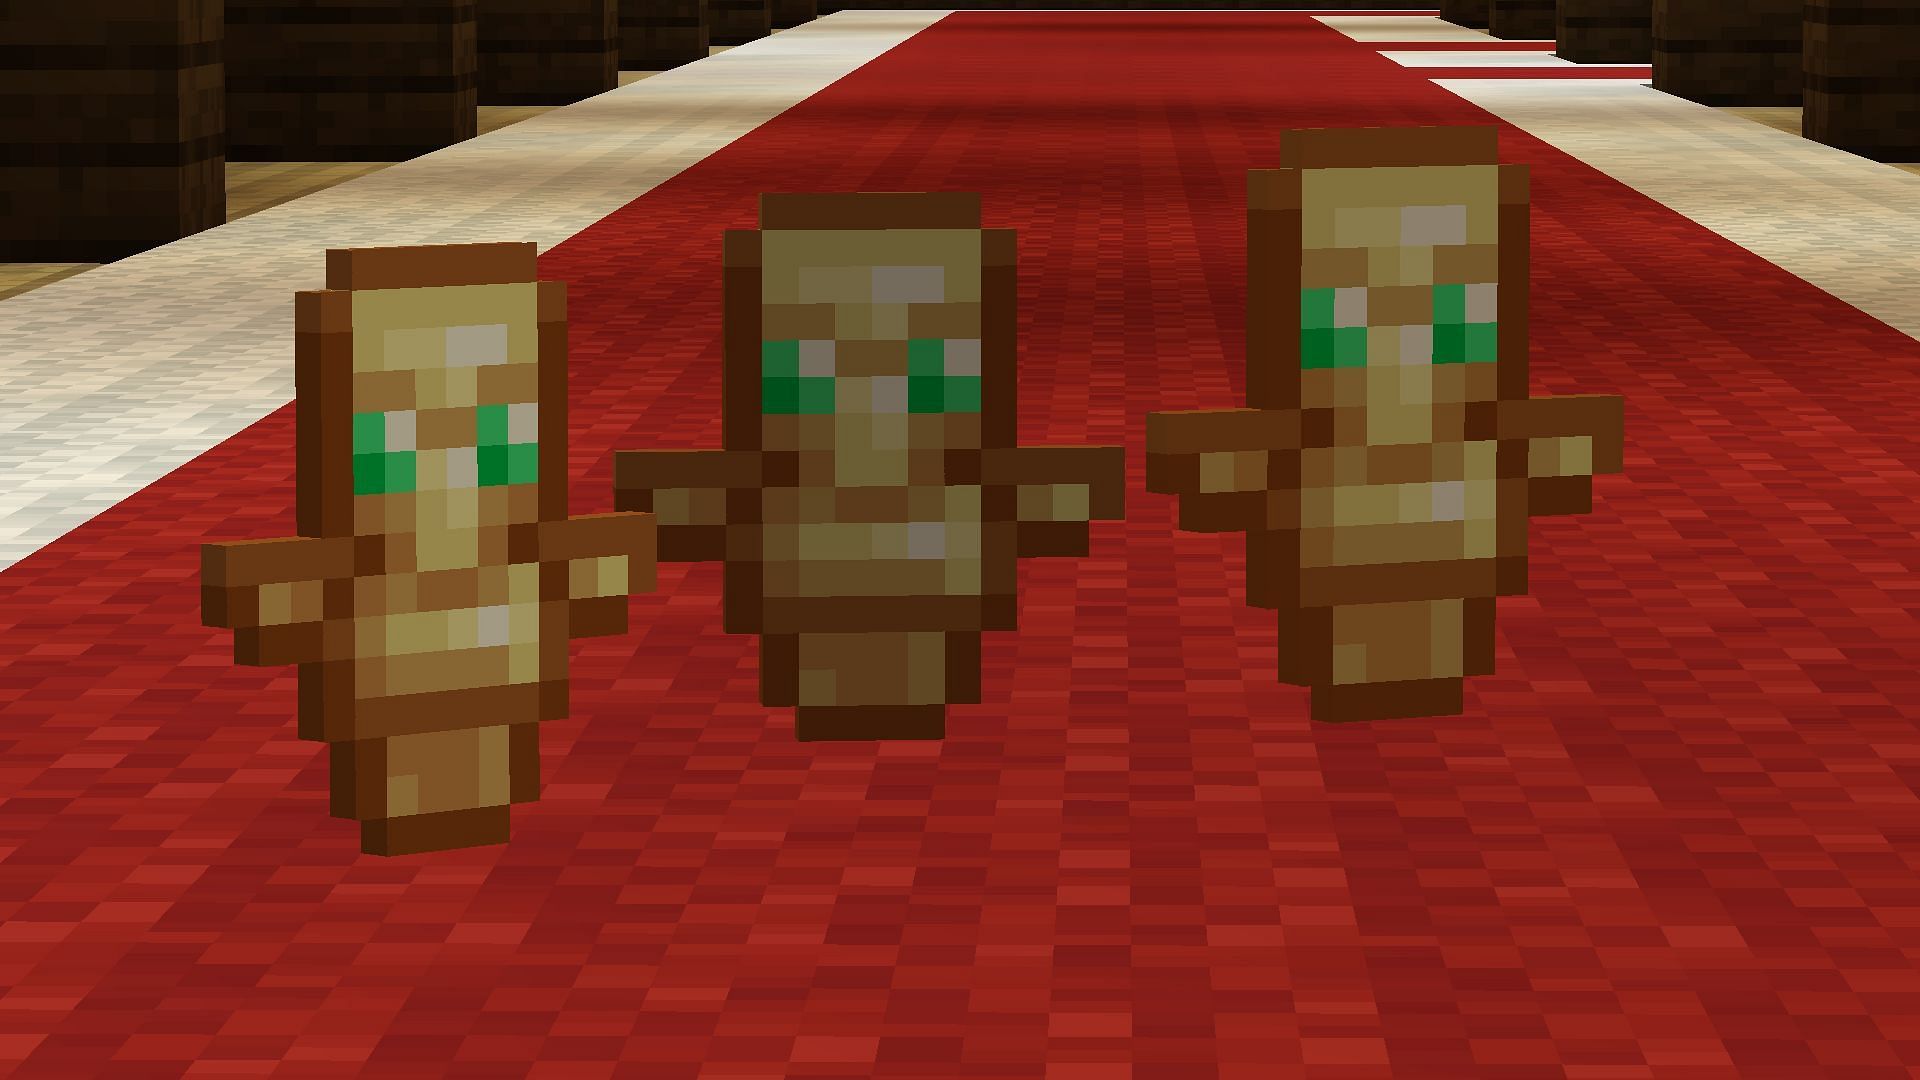 Totem of Undying can save players from creeper attacks in Minecraft (Image via Mojang)